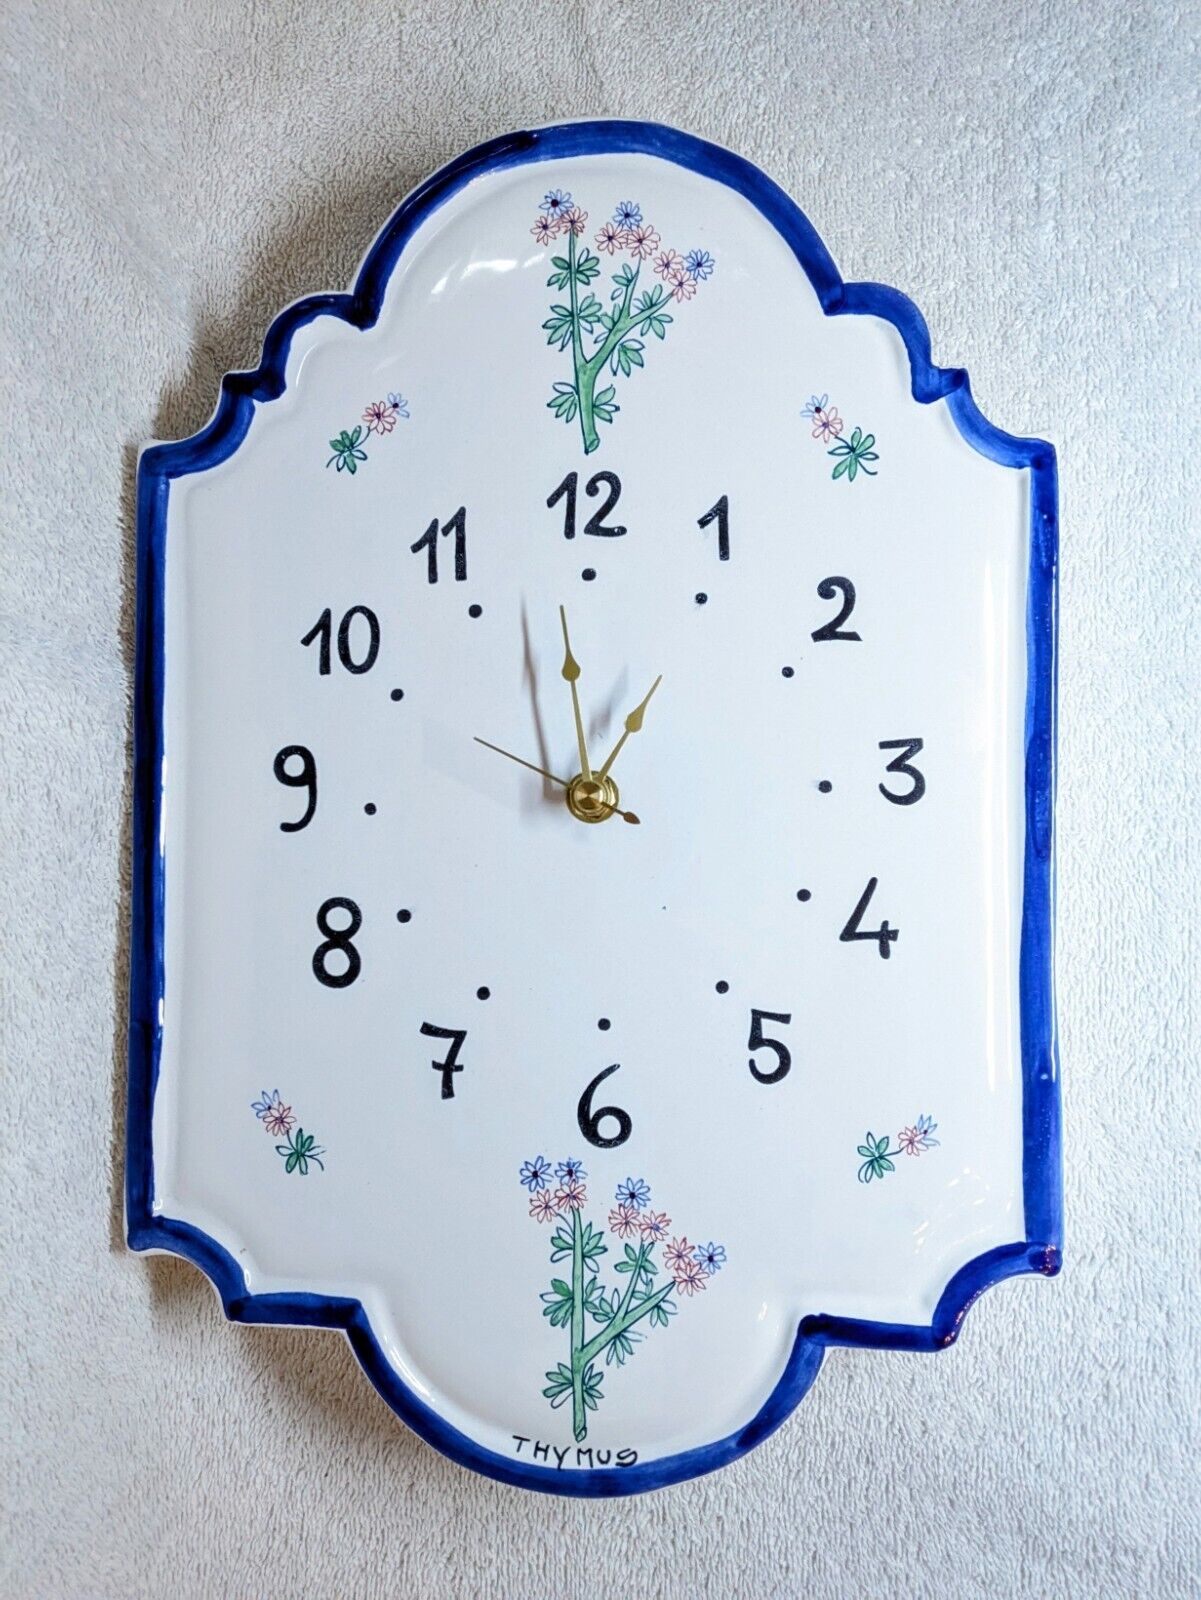 Vintage Williams Sonoma Thymus Hand Painted Porcelain Wall Clock Made in Italy